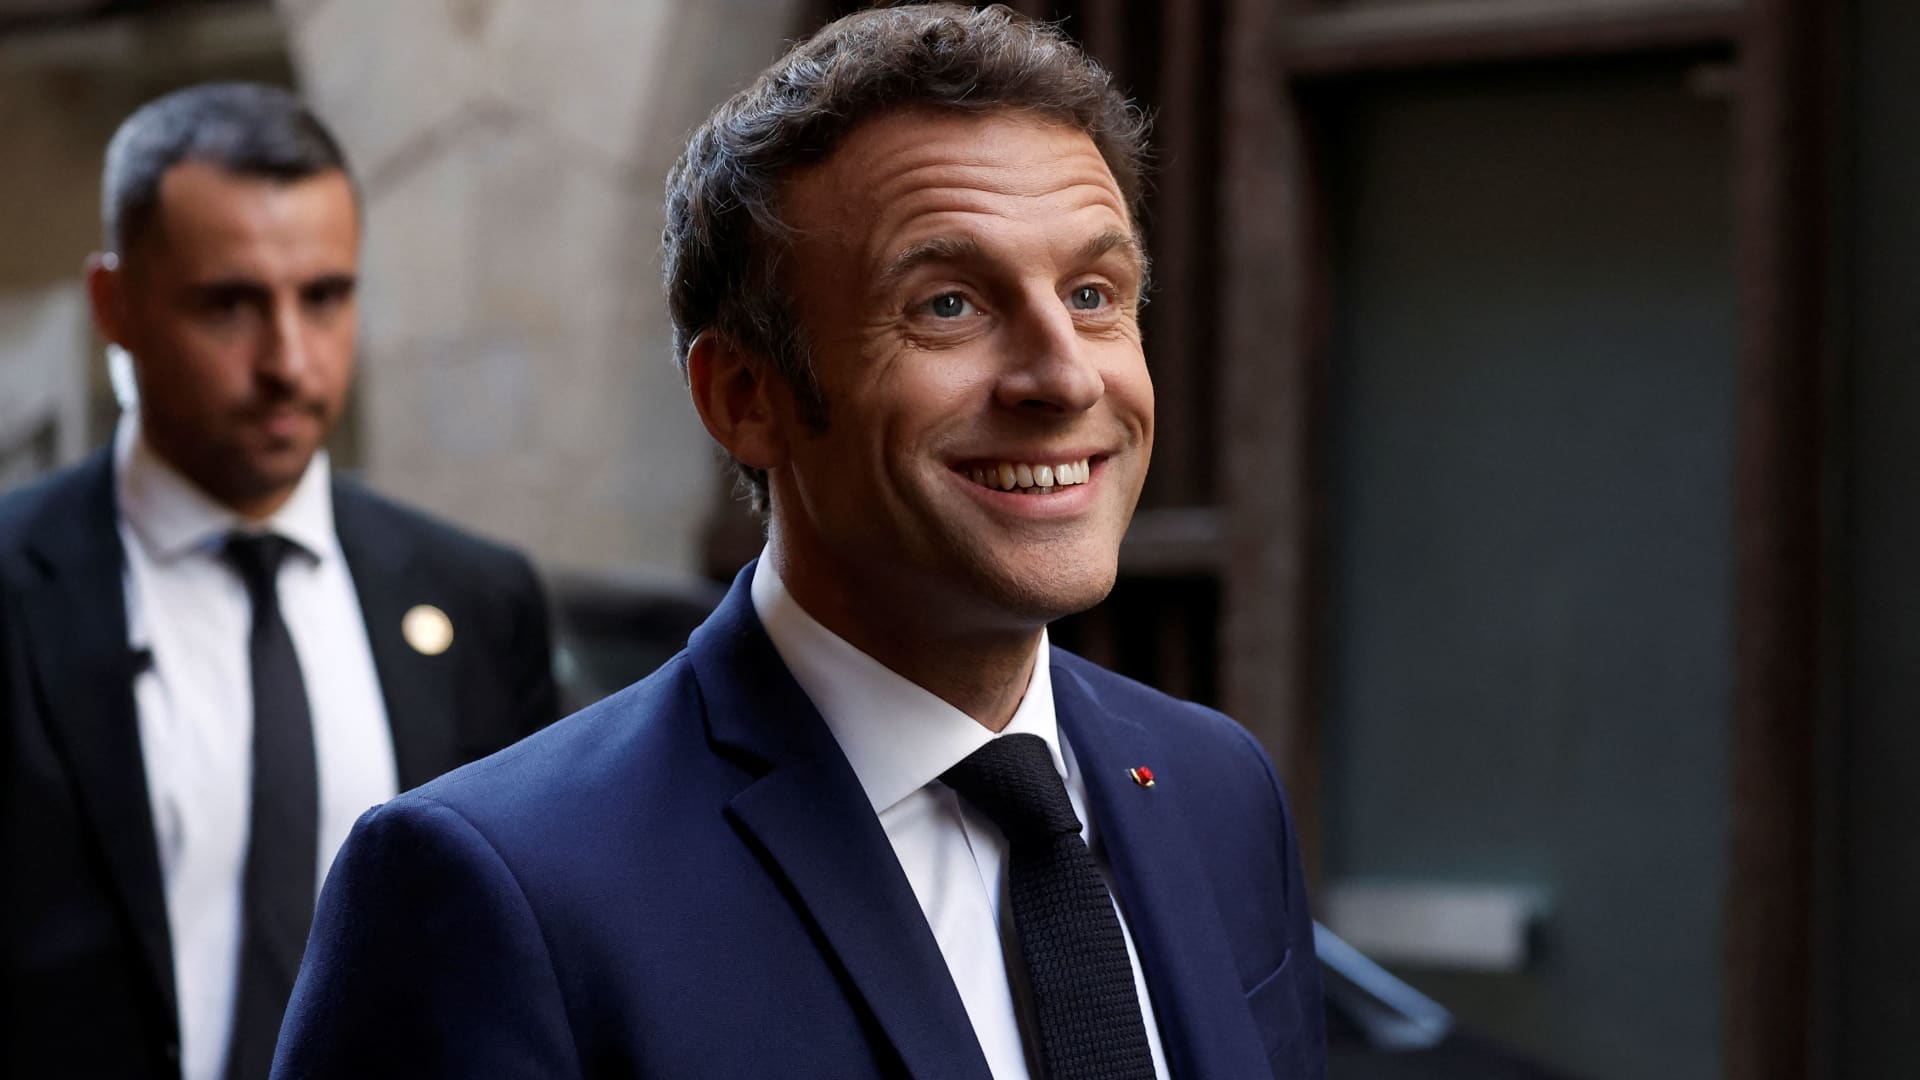 French projections: Macron’s centrists to keep a majority